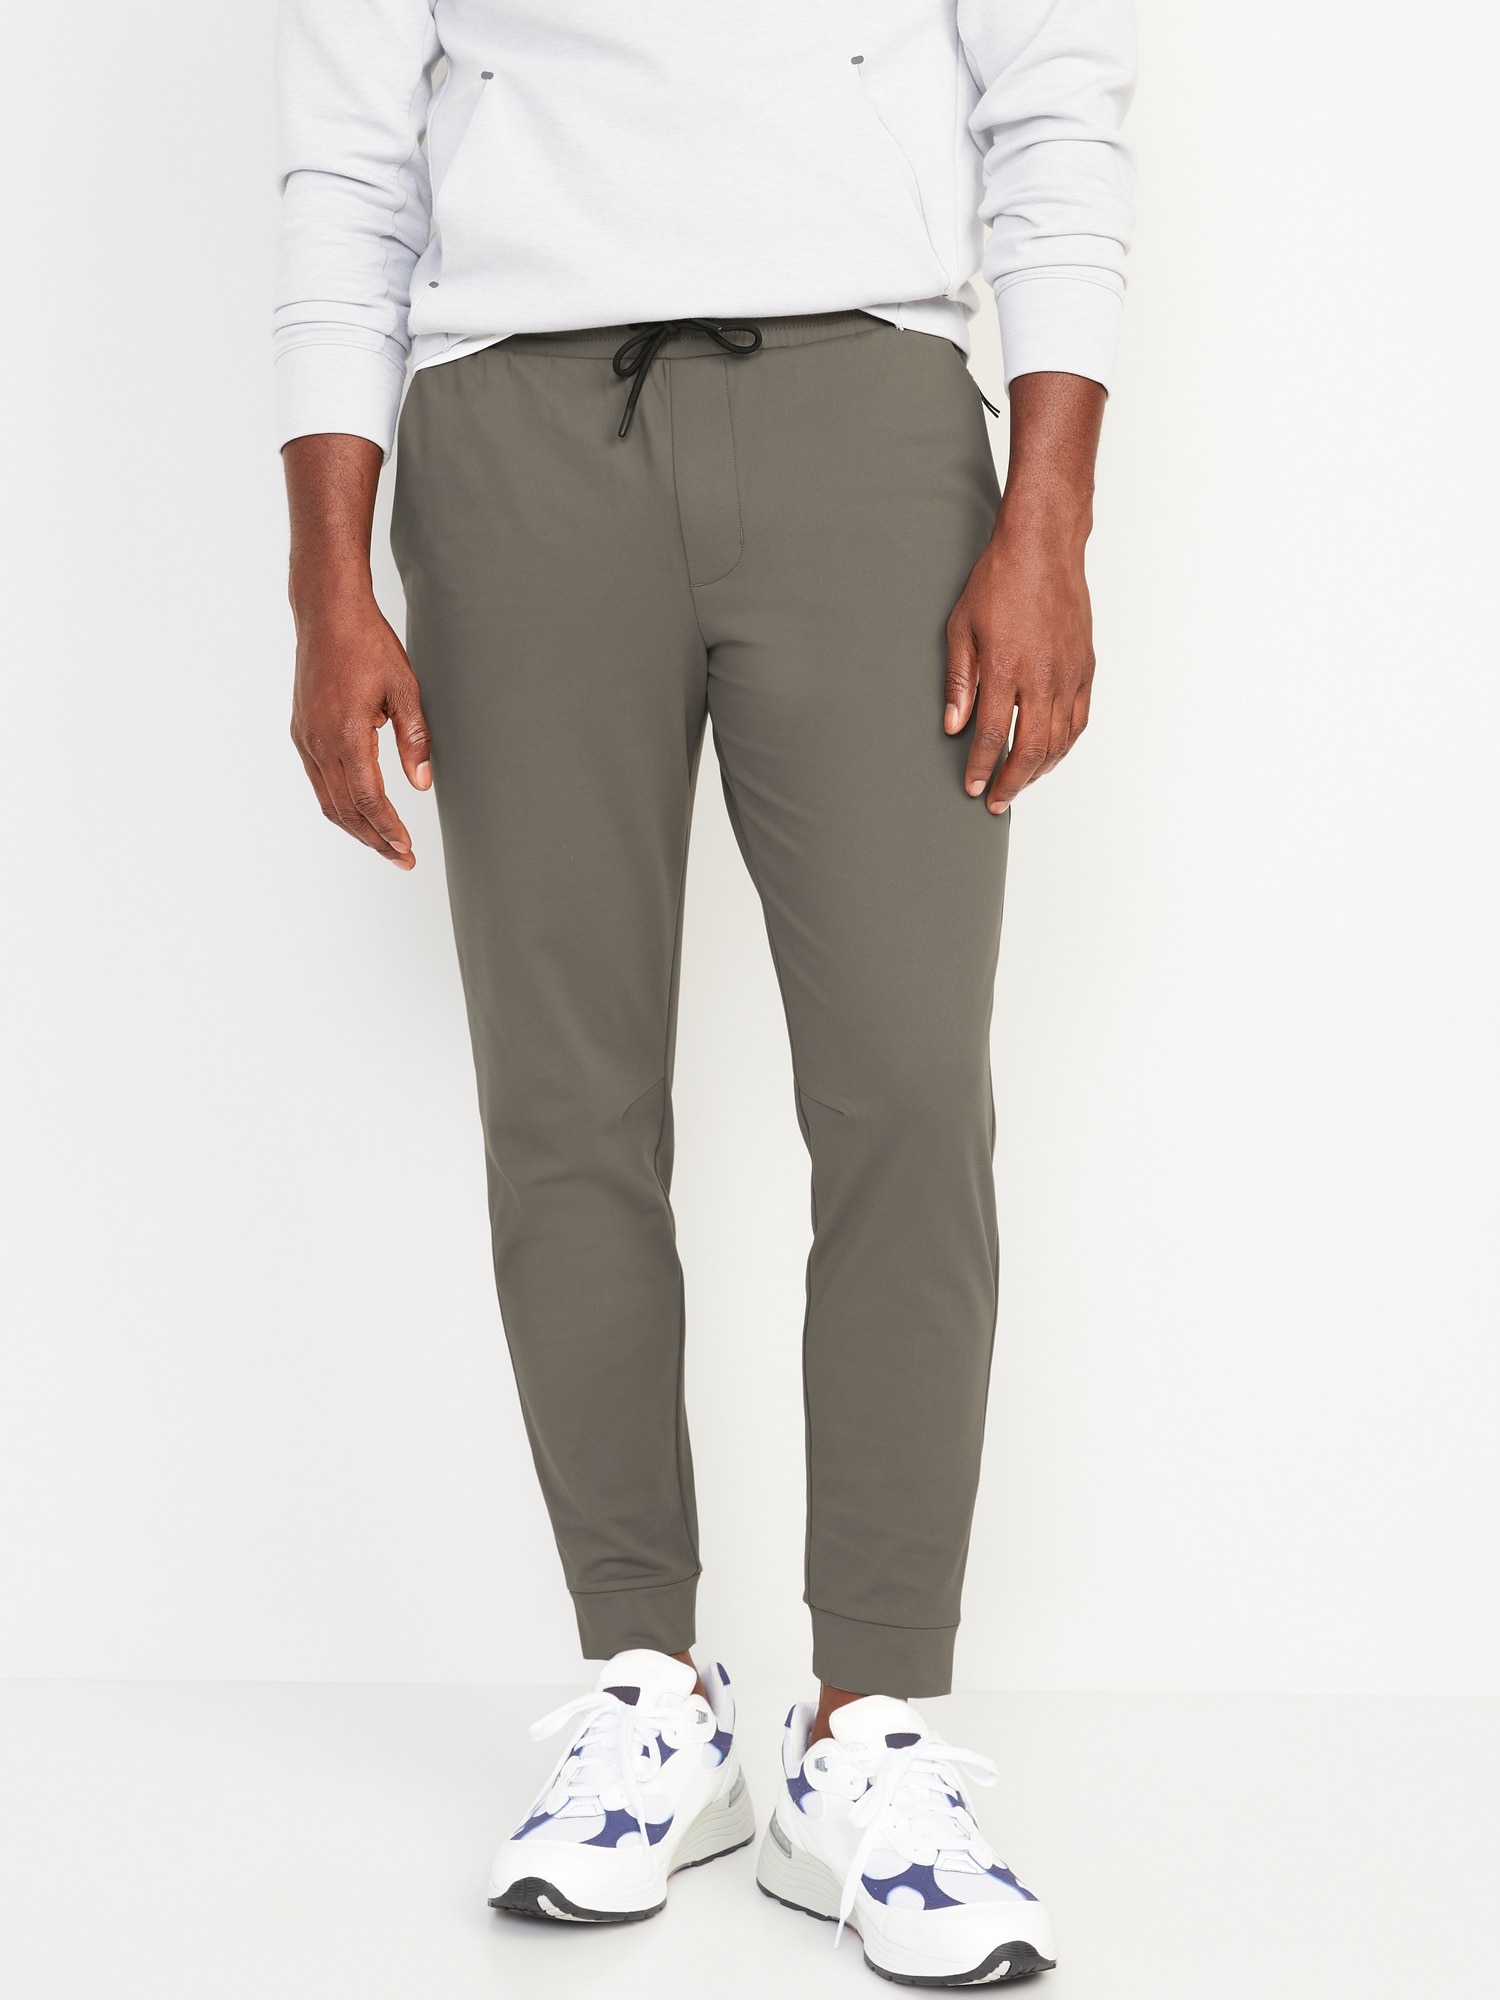 PowerSoft Coze Edition Jogger Pants | Old Navy